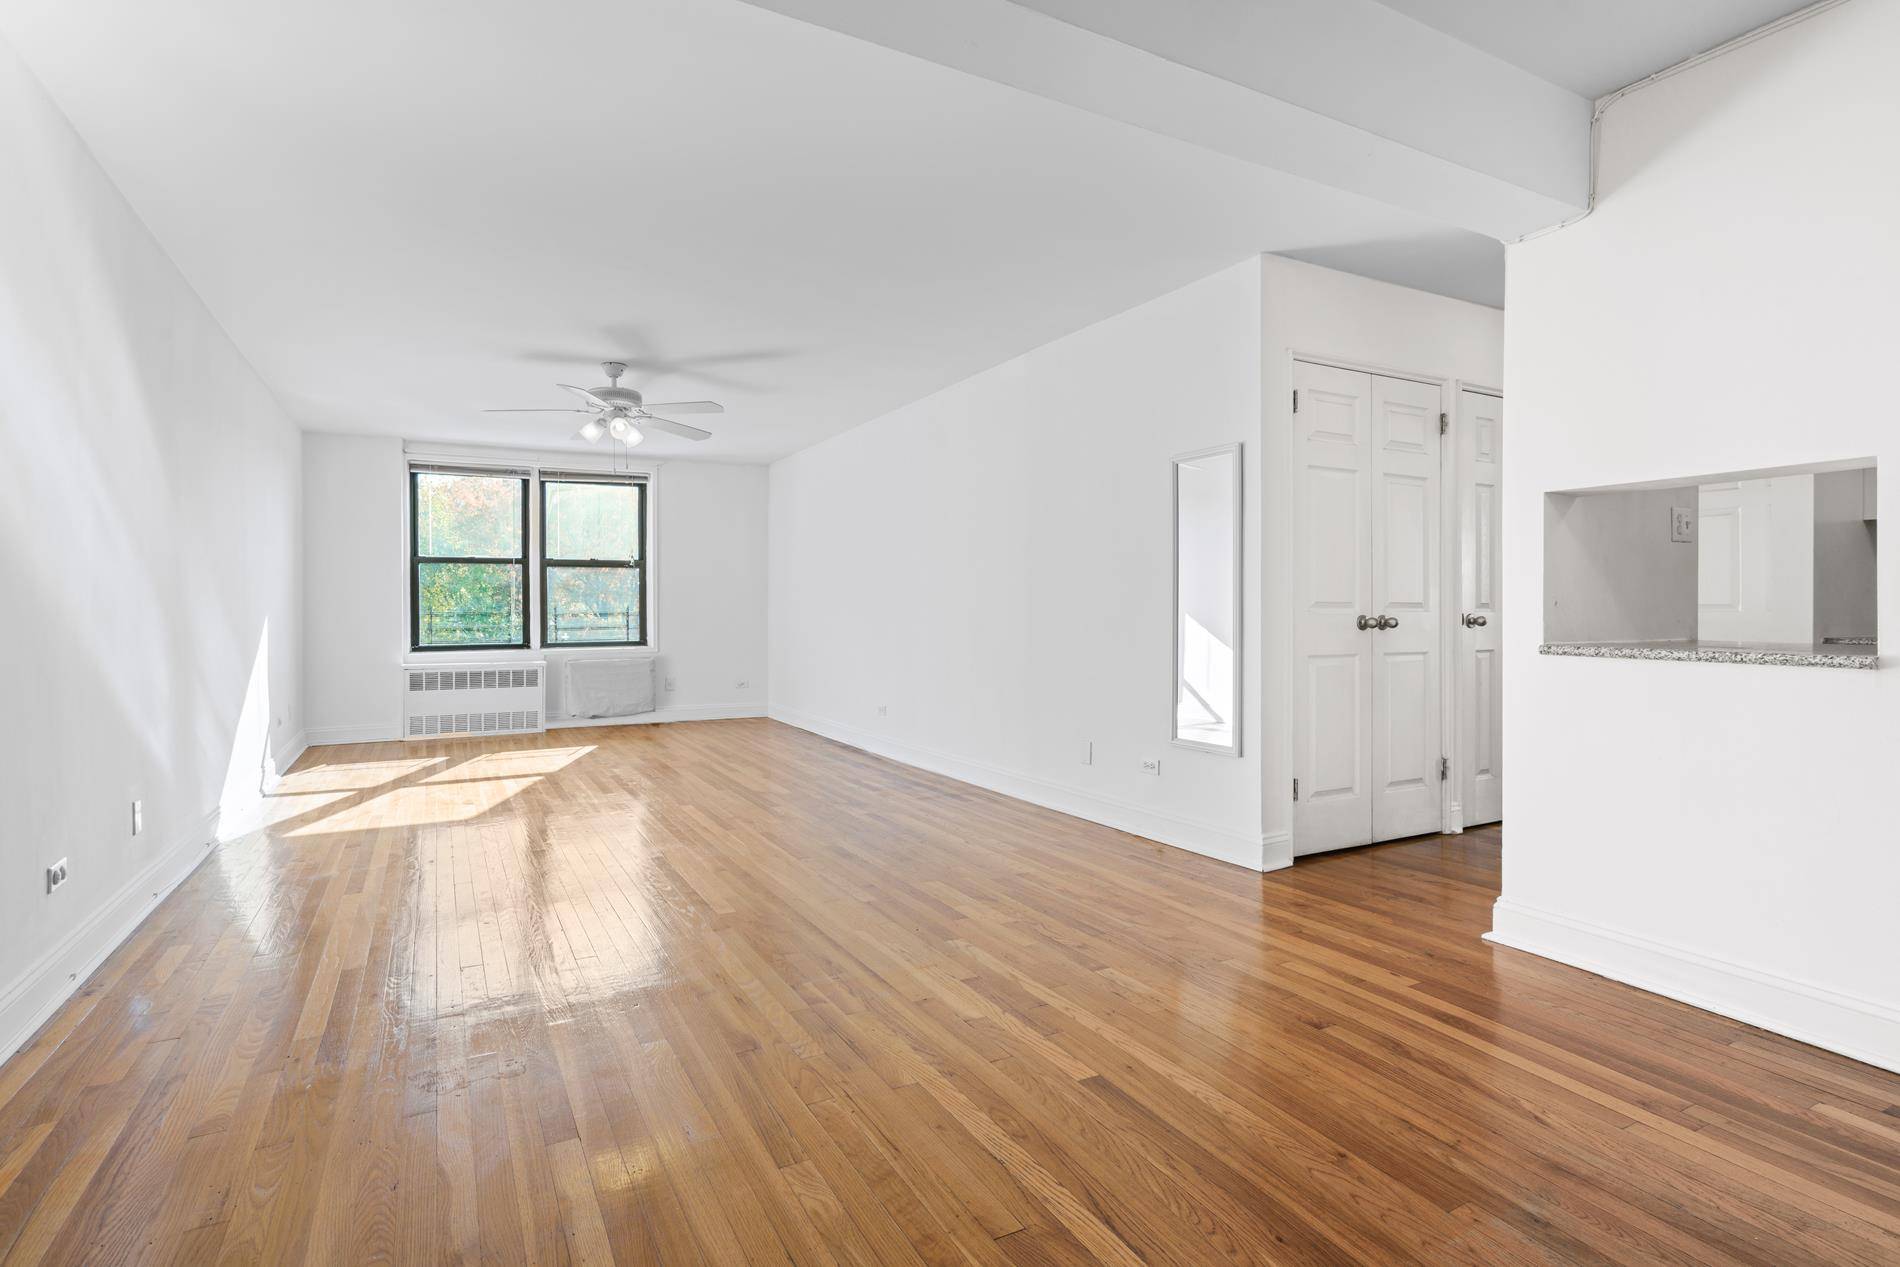 Welcome home to this rare 3 bedroom 2 bathroom condominium, conveniently located in the heart of Jackson Heights.